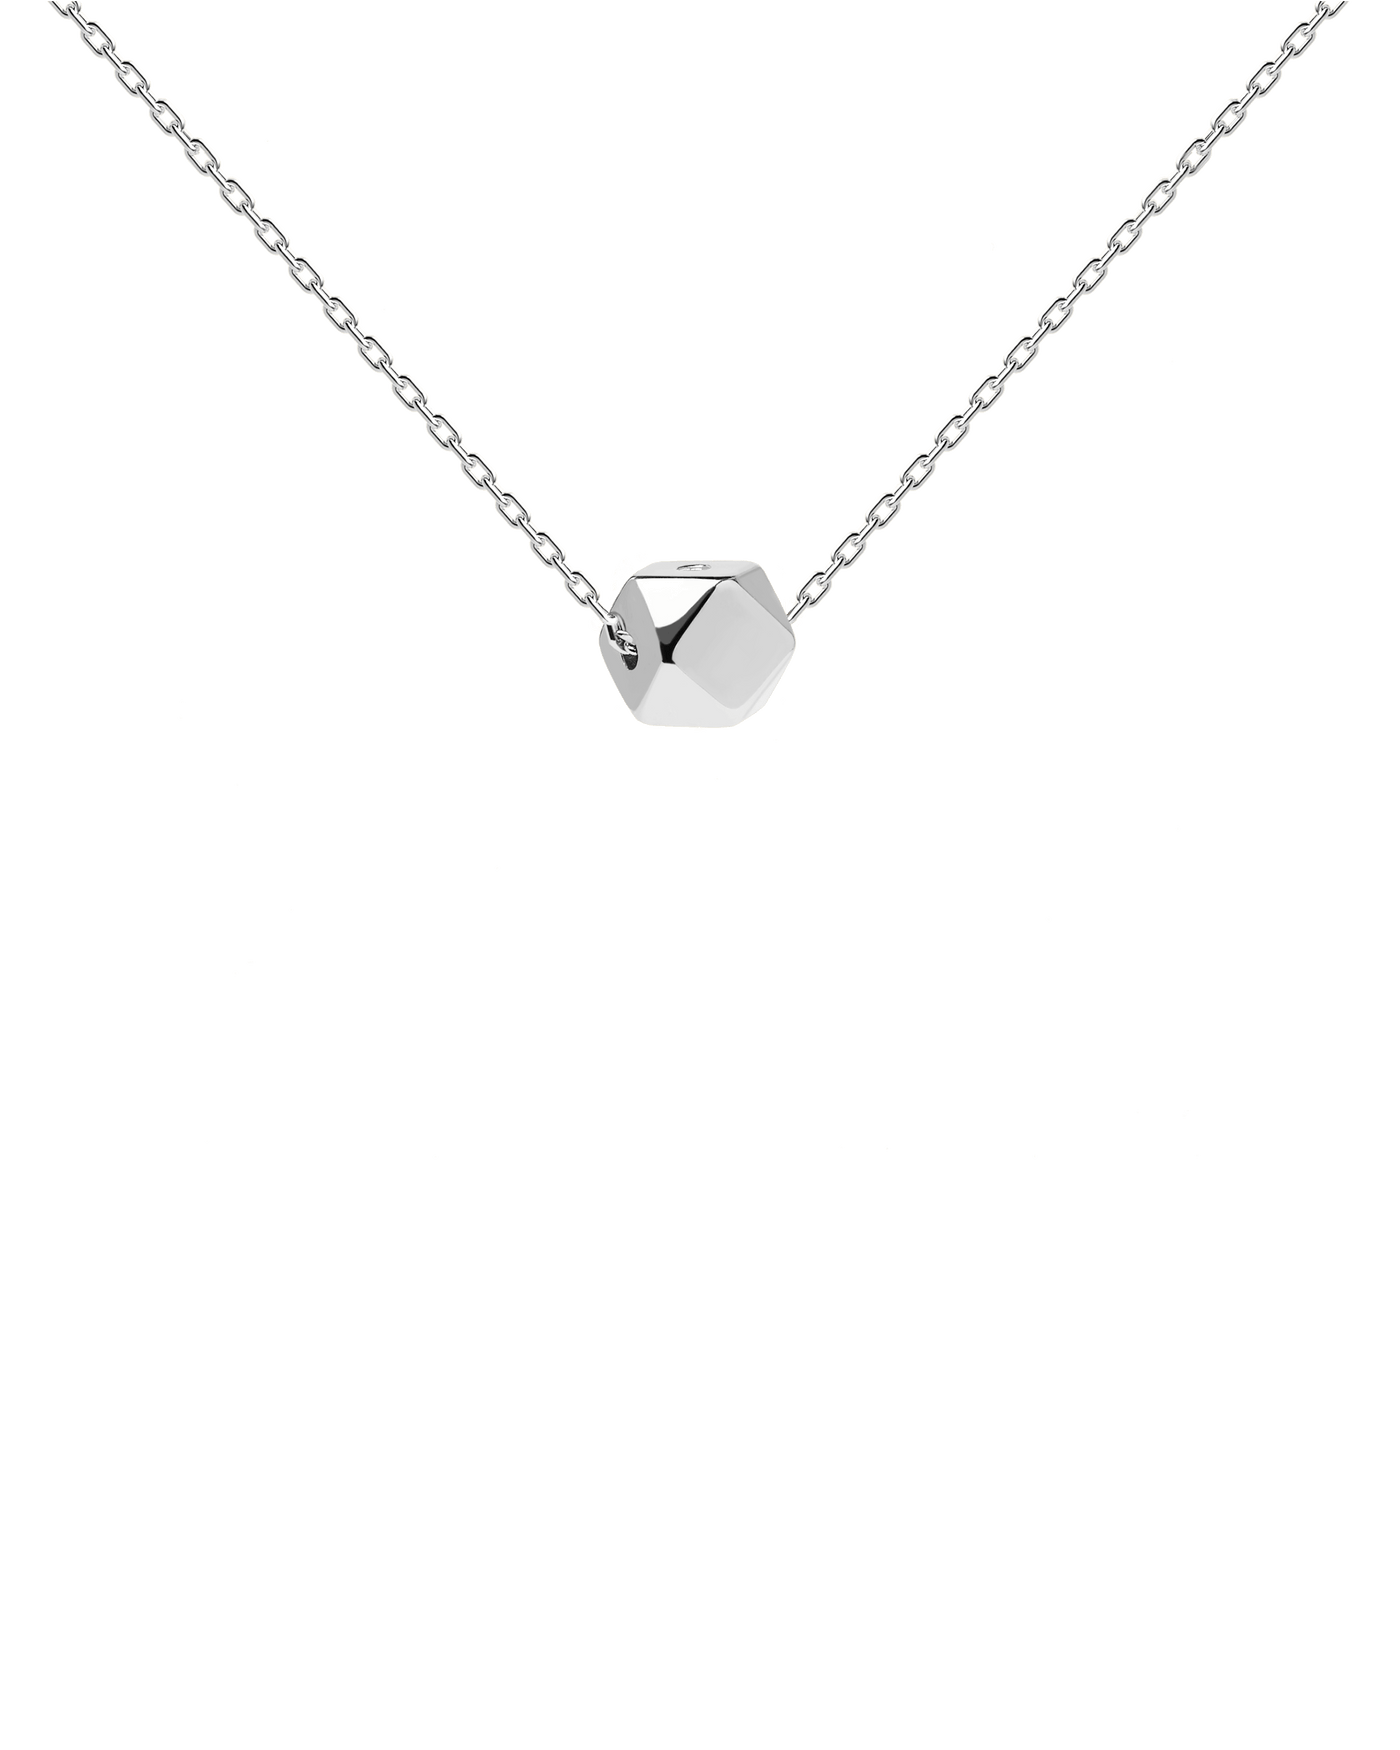 2023 Selection | Bambina Silver Necklace. Get the latest arrival from PDPAOLA. Place your order safely and get this Best Seller. Free Shipping over 40€